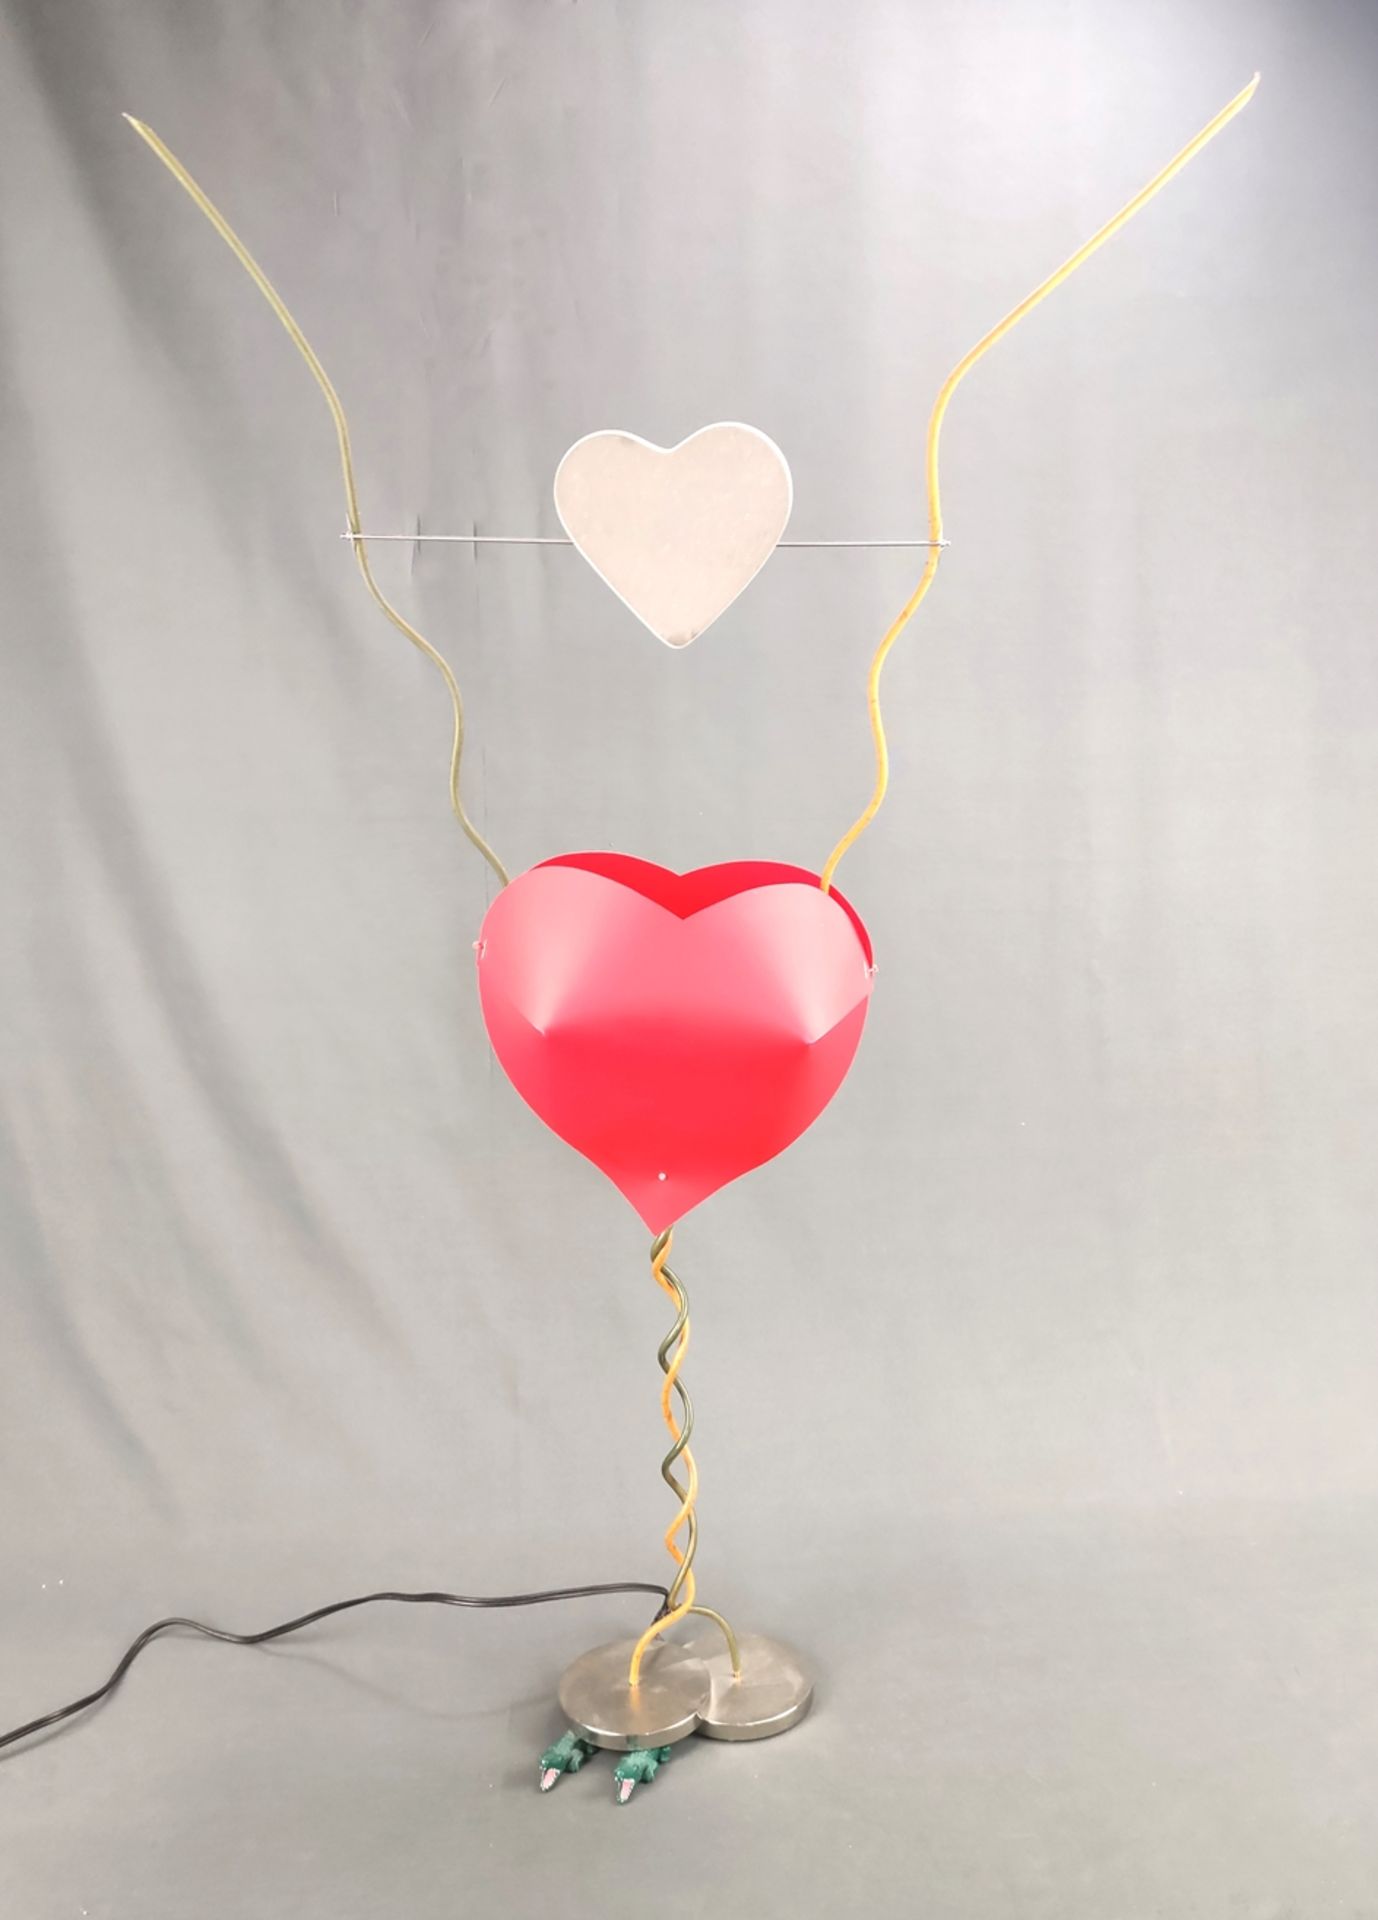 Design lamp/ light, Ingo Maurer, "One from the heart", height 95cm, working condition